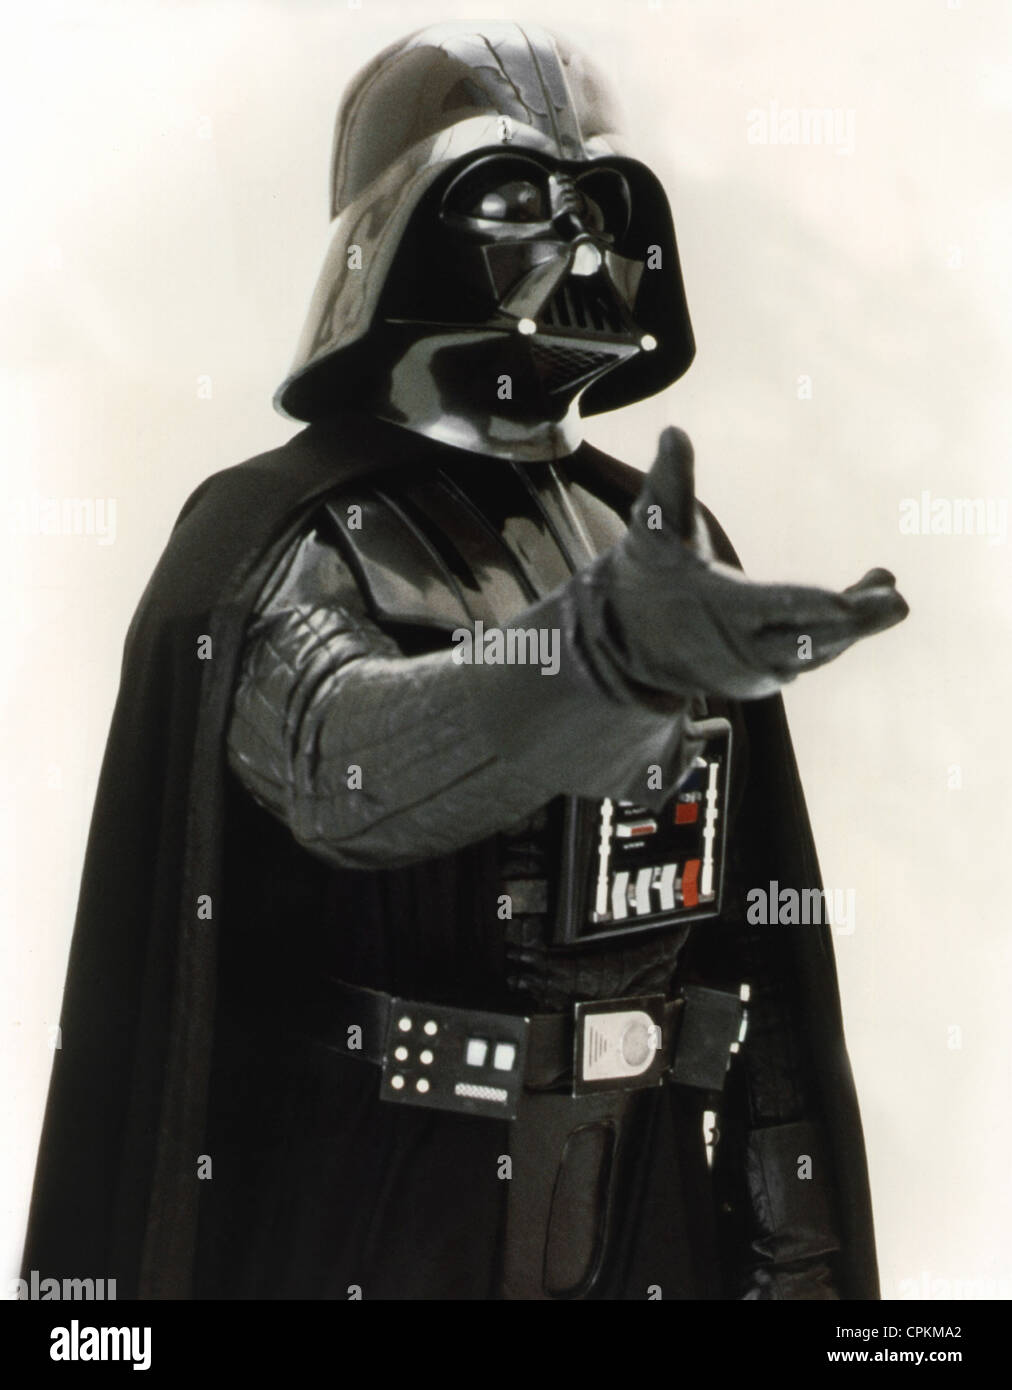 A portrait of Darth Vader in the 1977 film Star Wars. Darth Vader is played by the actor David Prowse. Stock Photo